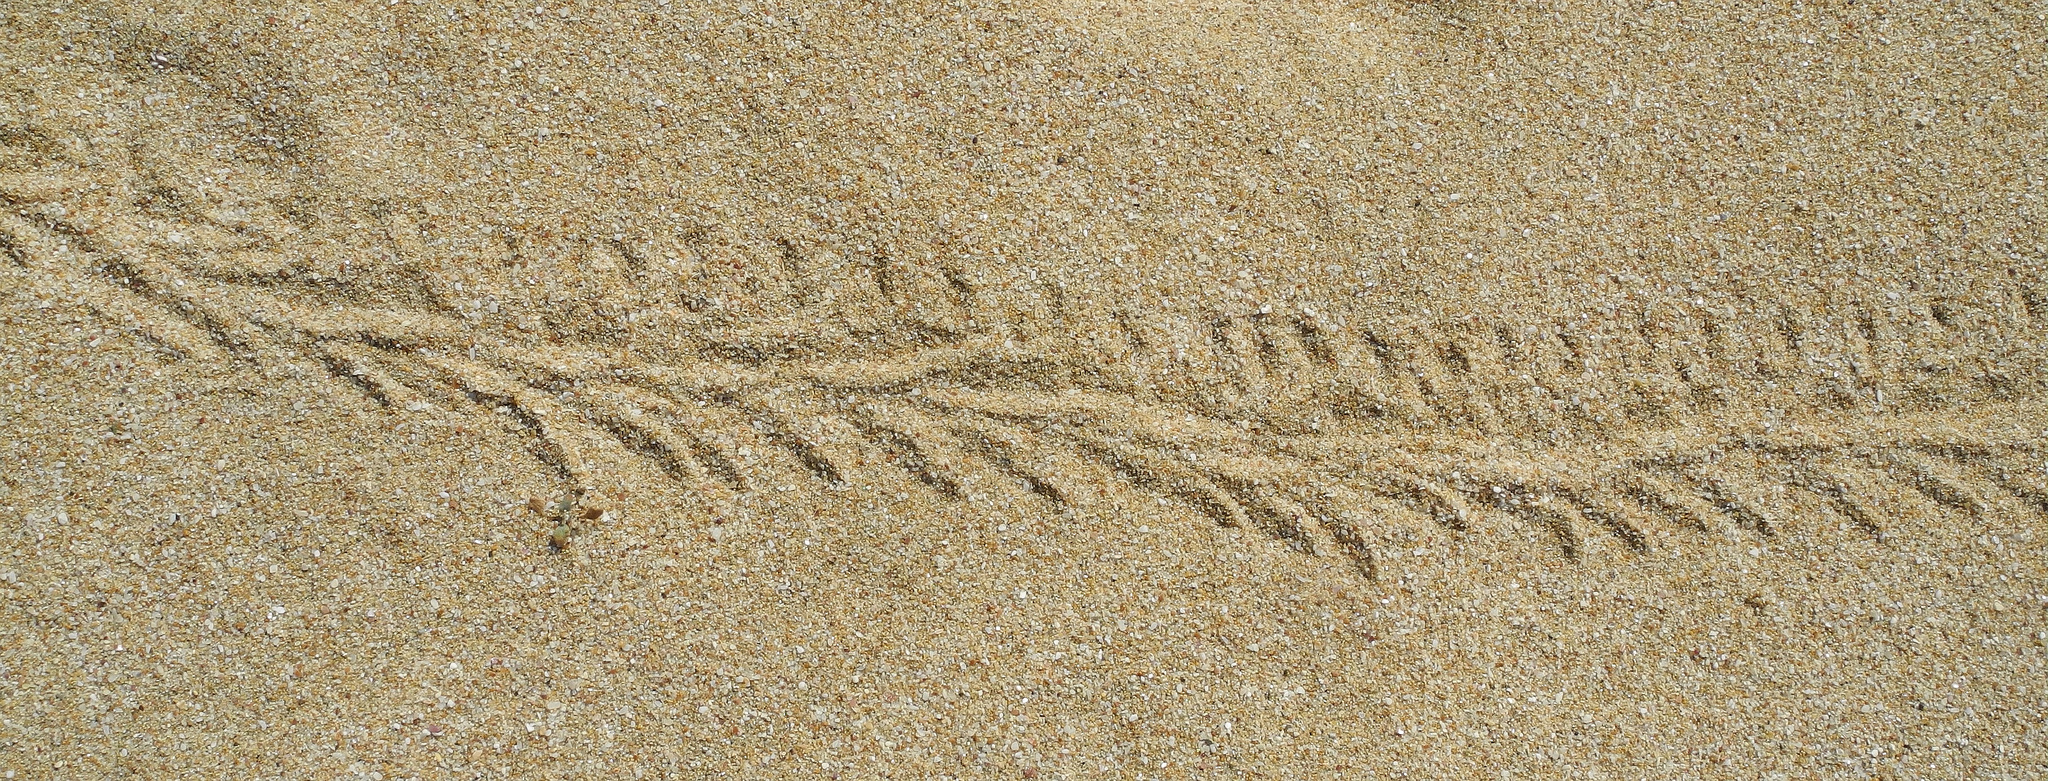 The Footprints of the Common Fish